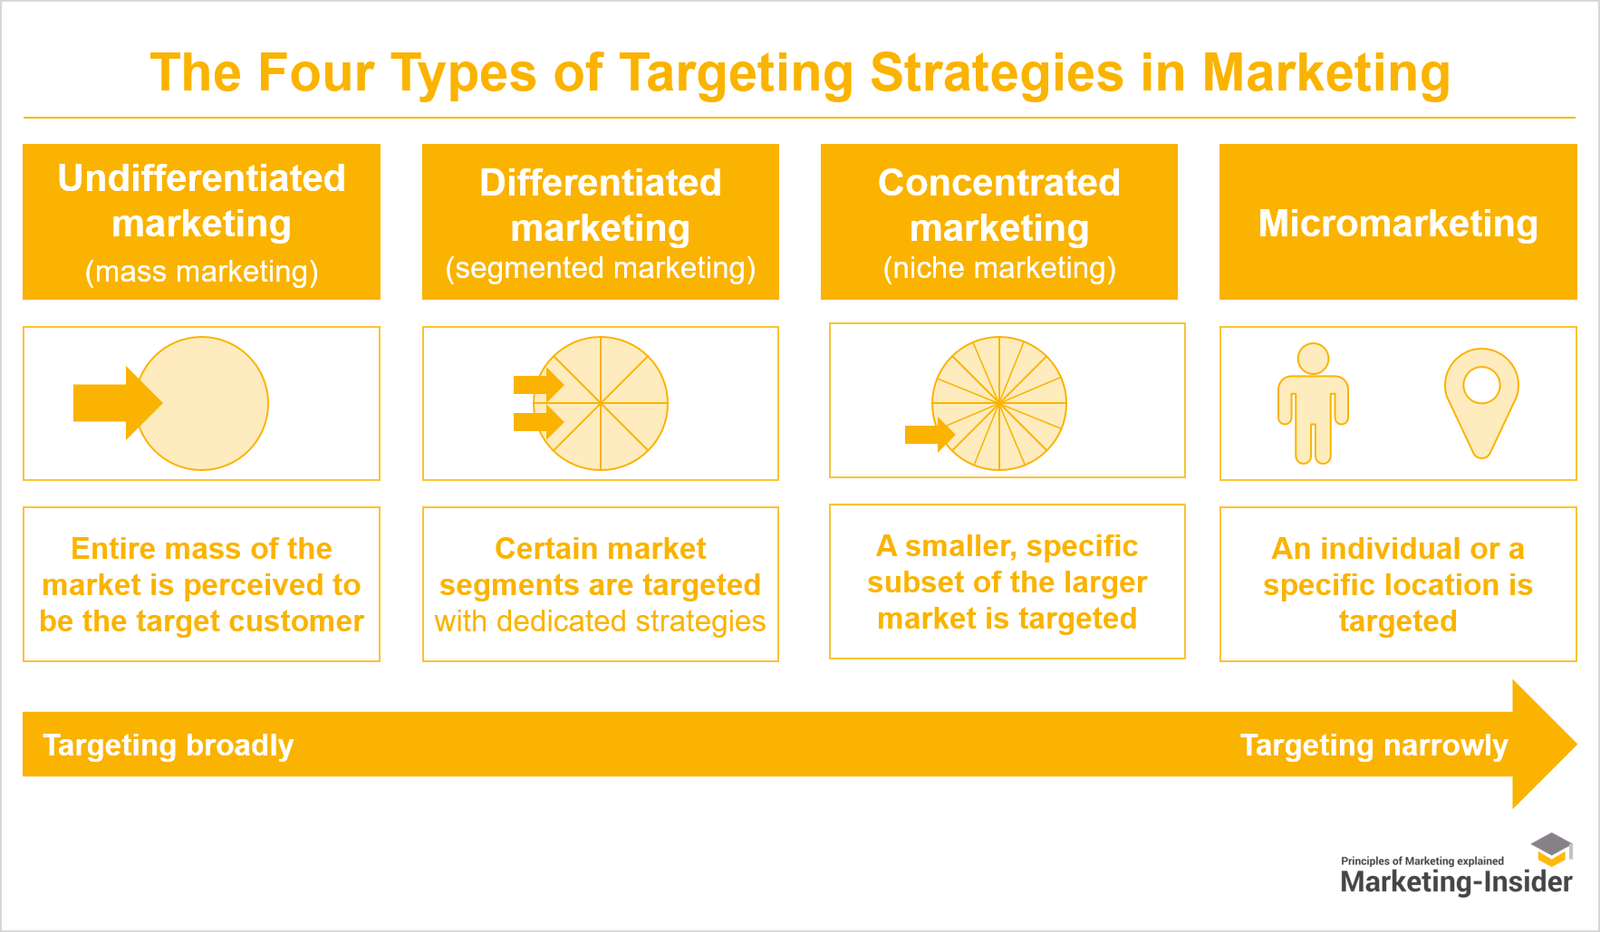 differentiated targeting